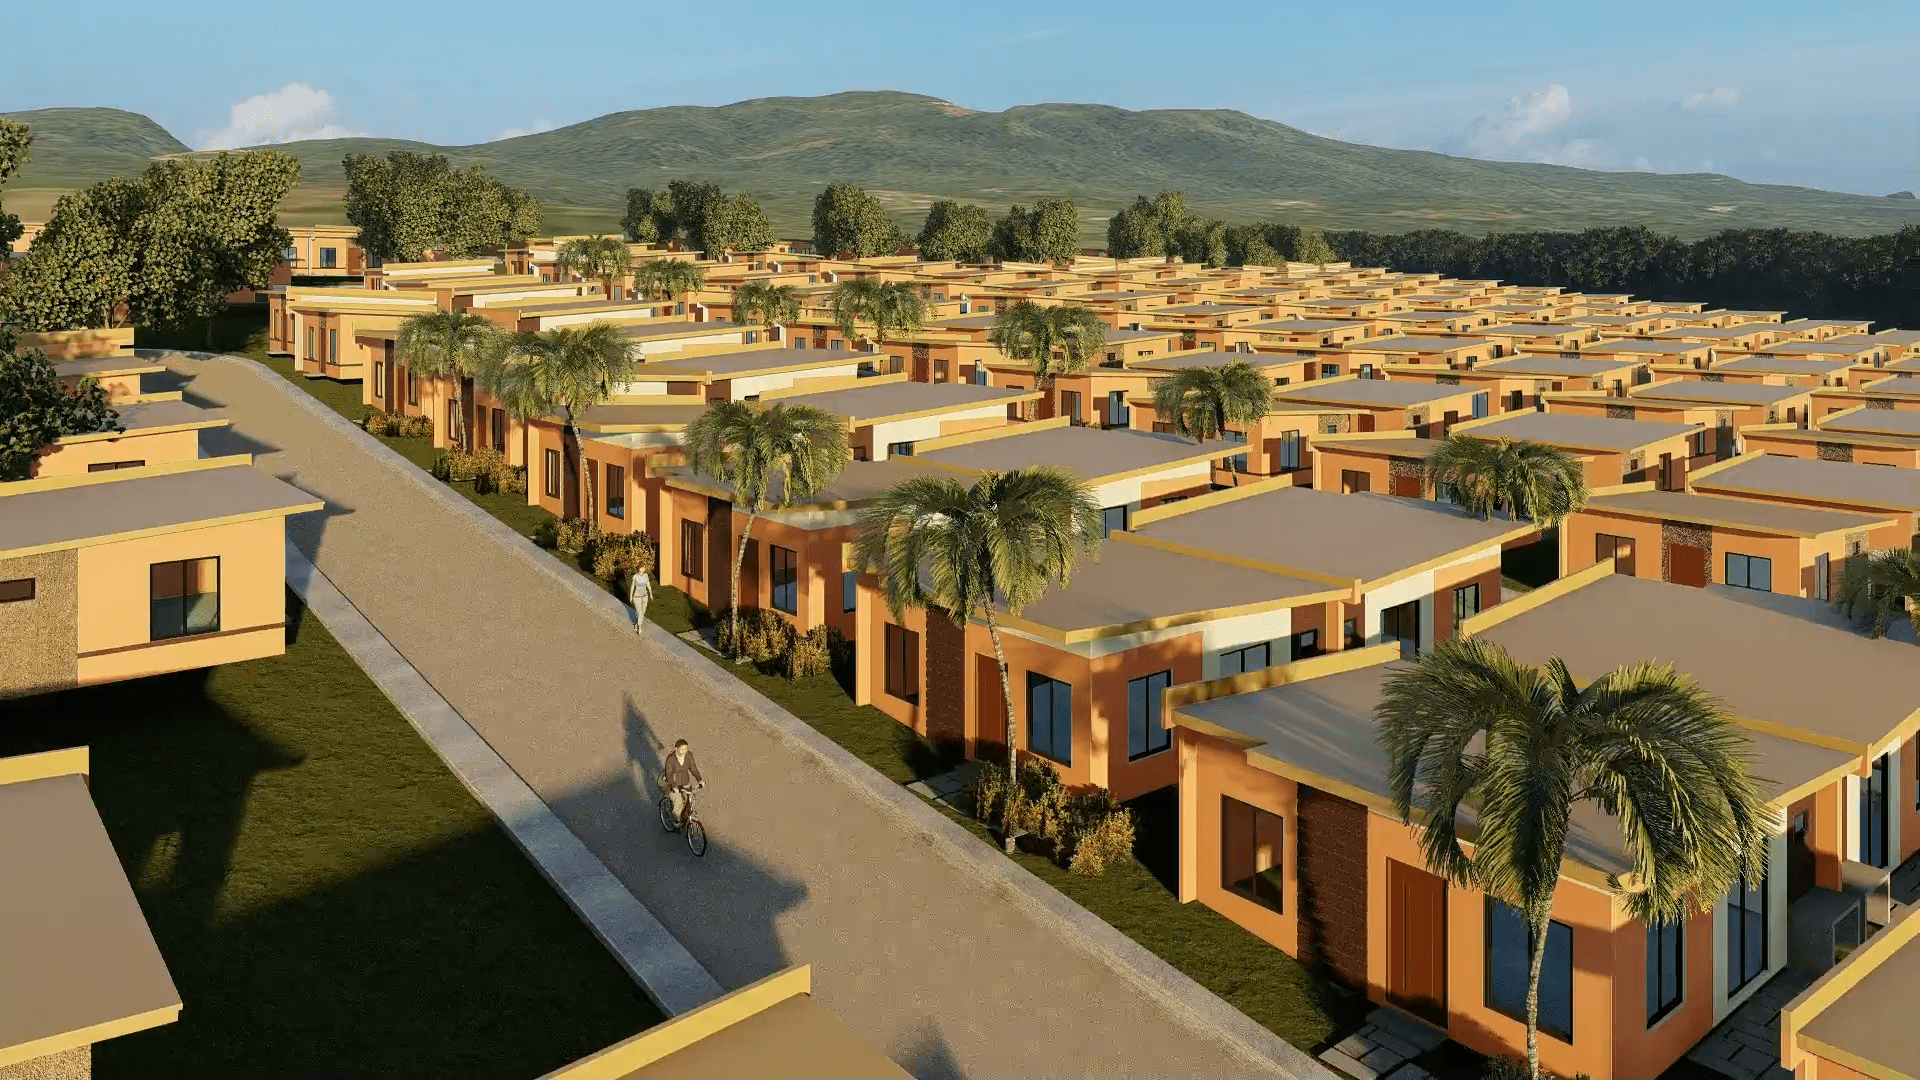 Bria Homes allocates 2.5B for affordable housing in 2021